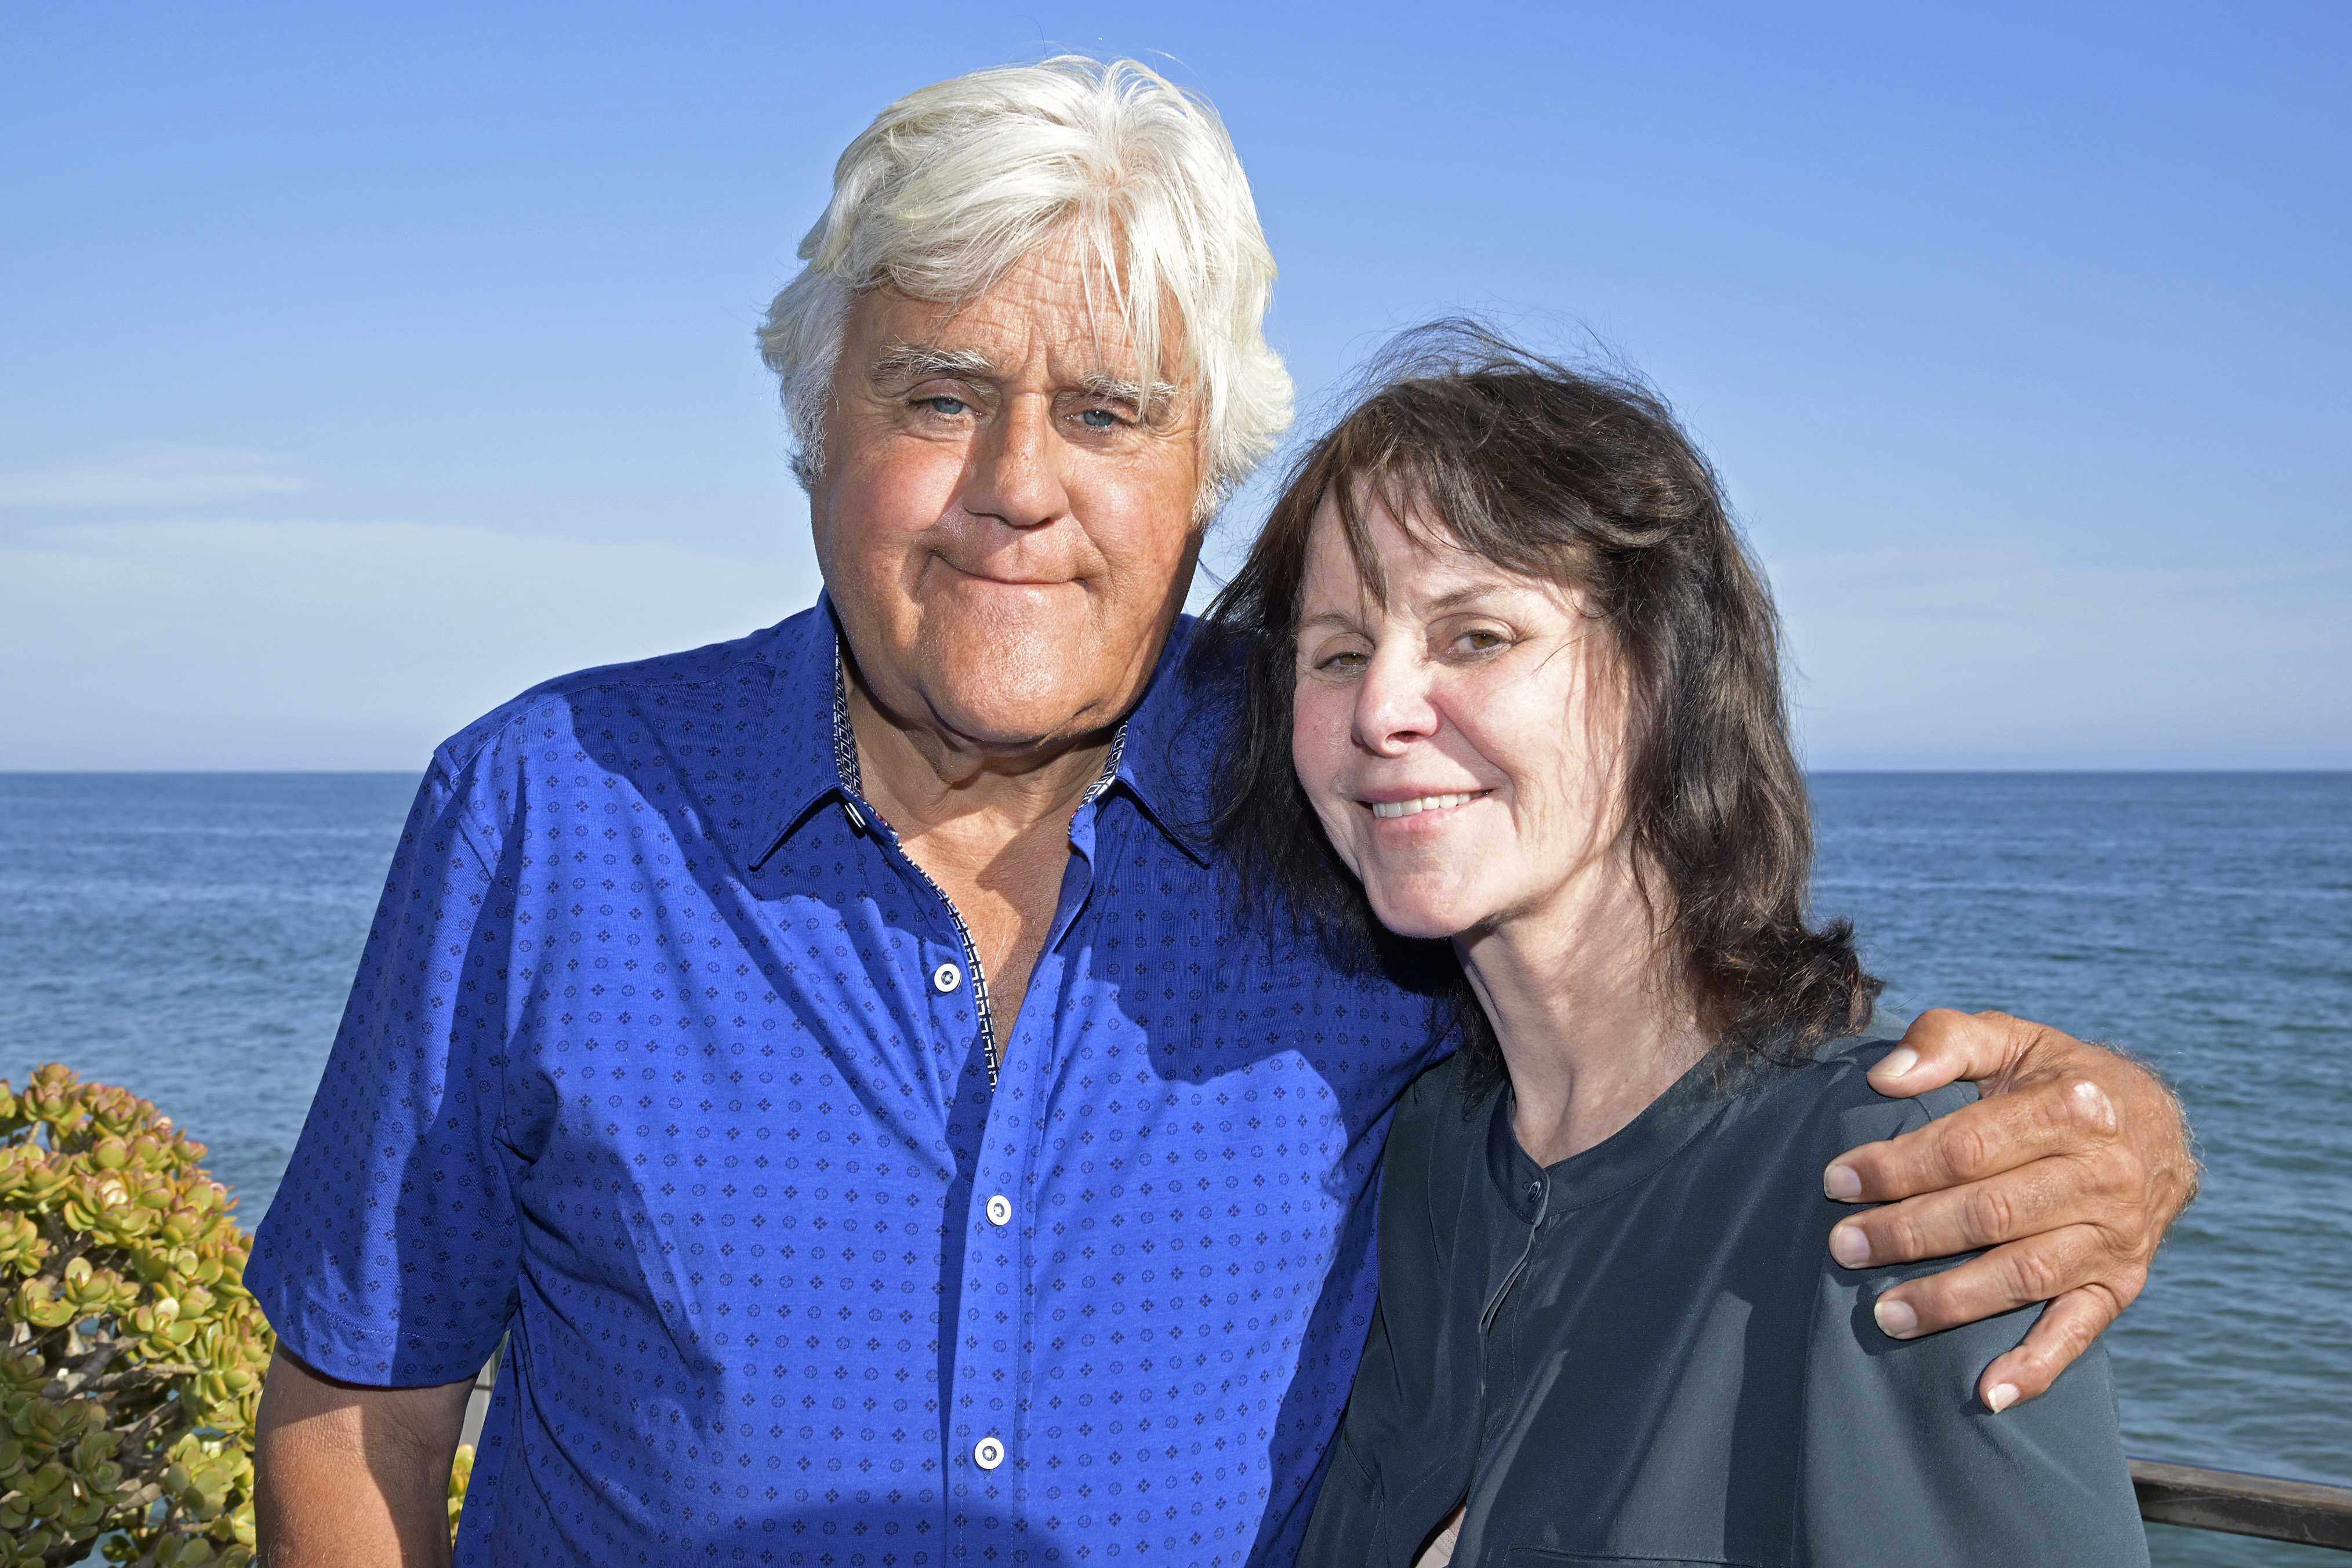 Jay Leno and Mavis Leno have been together for over 40 years. Photo: Getty Images